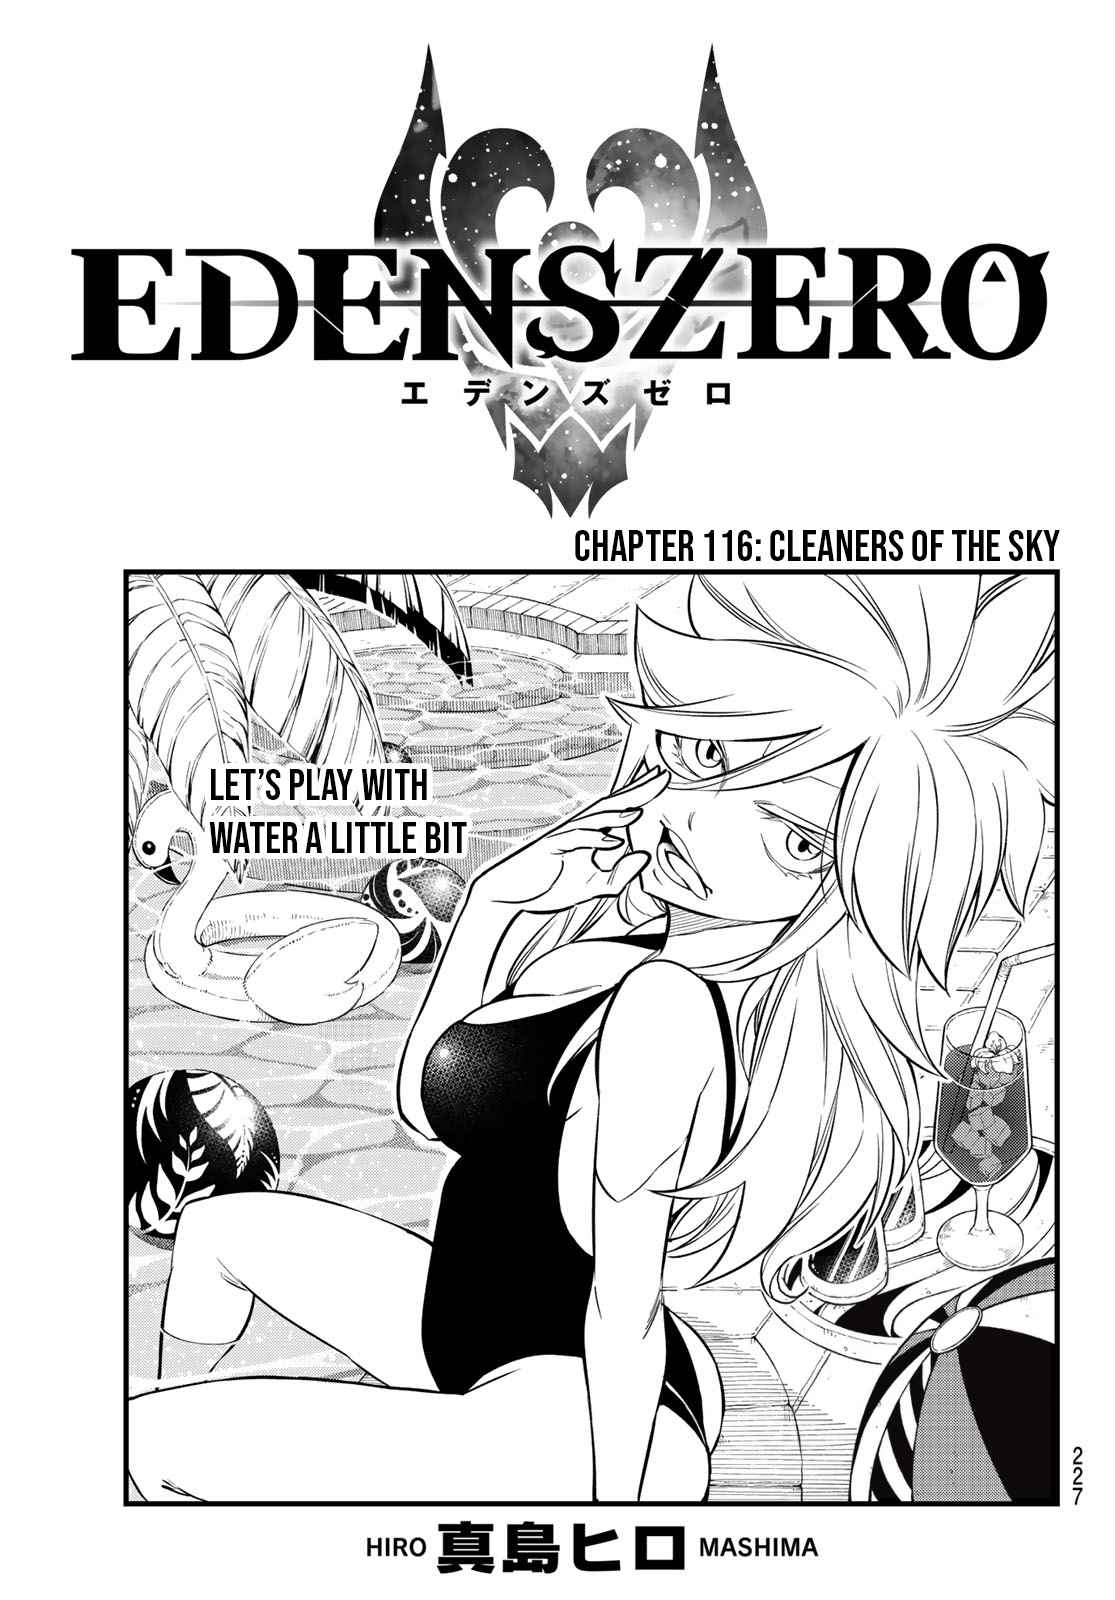 Edens Zero Ch. 116 Cleaners of the Sky